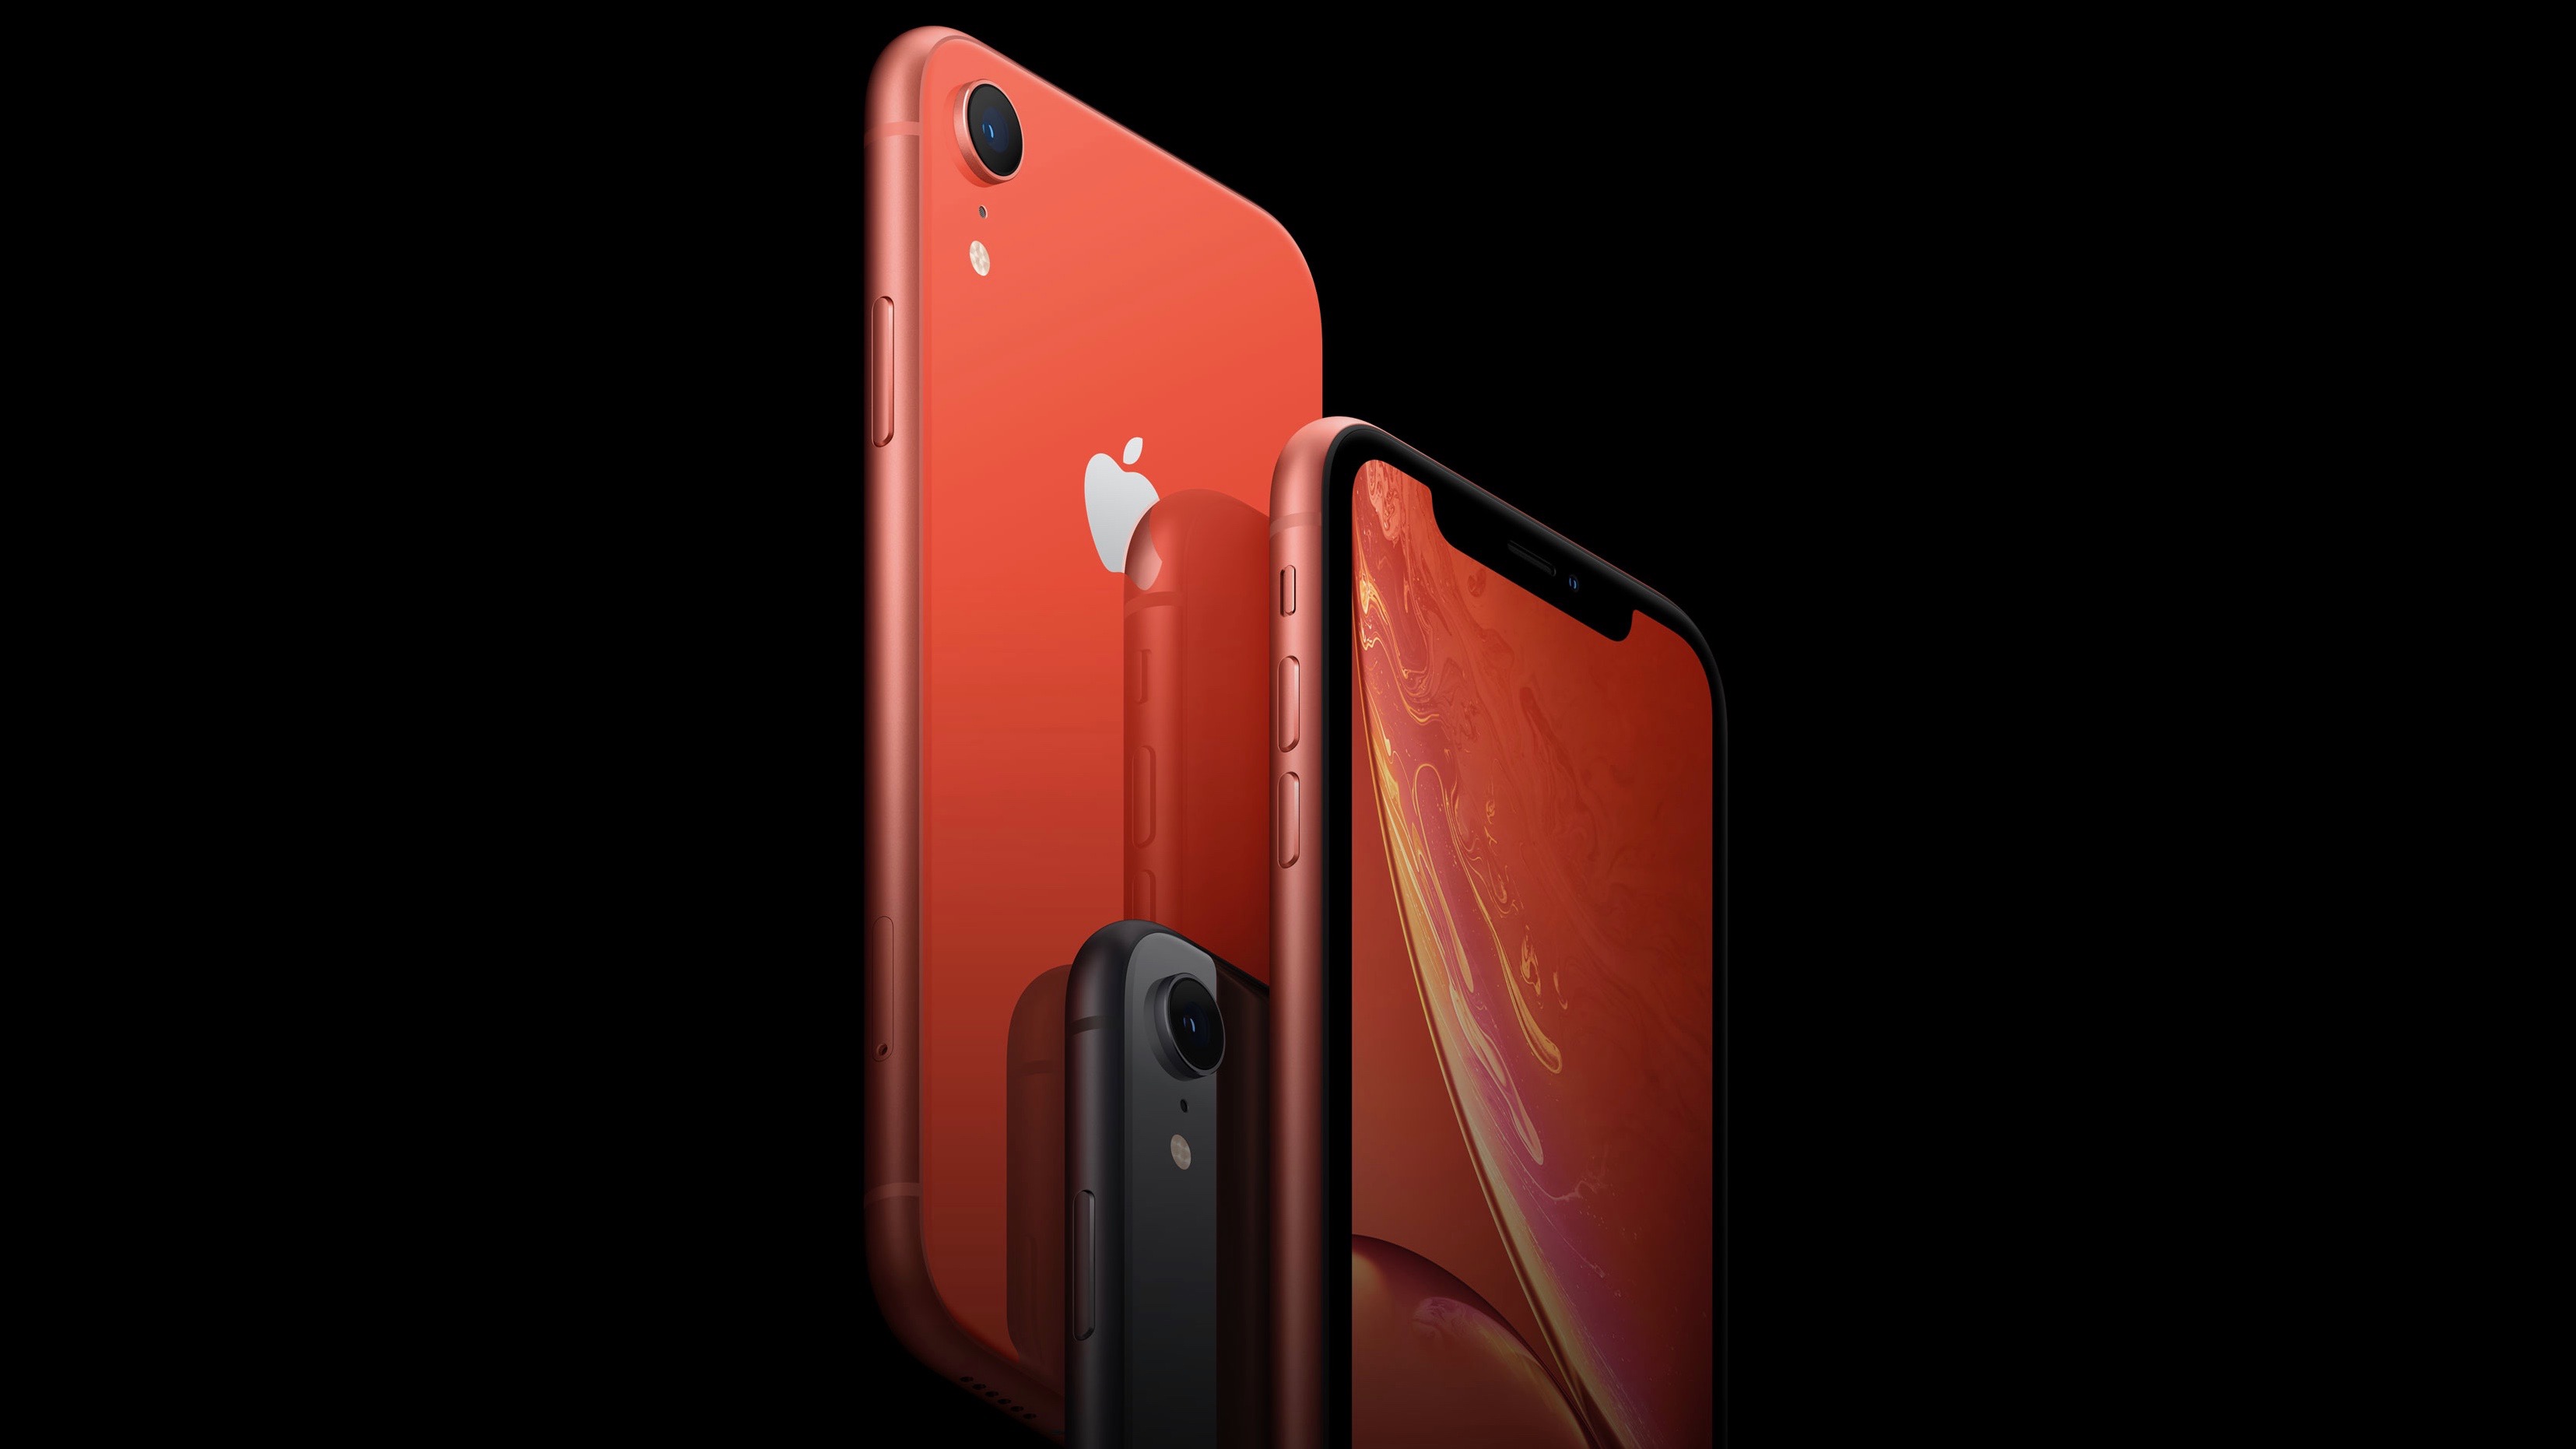 New iPhone XR Teardown Wallpapers Are Here | iFixit News